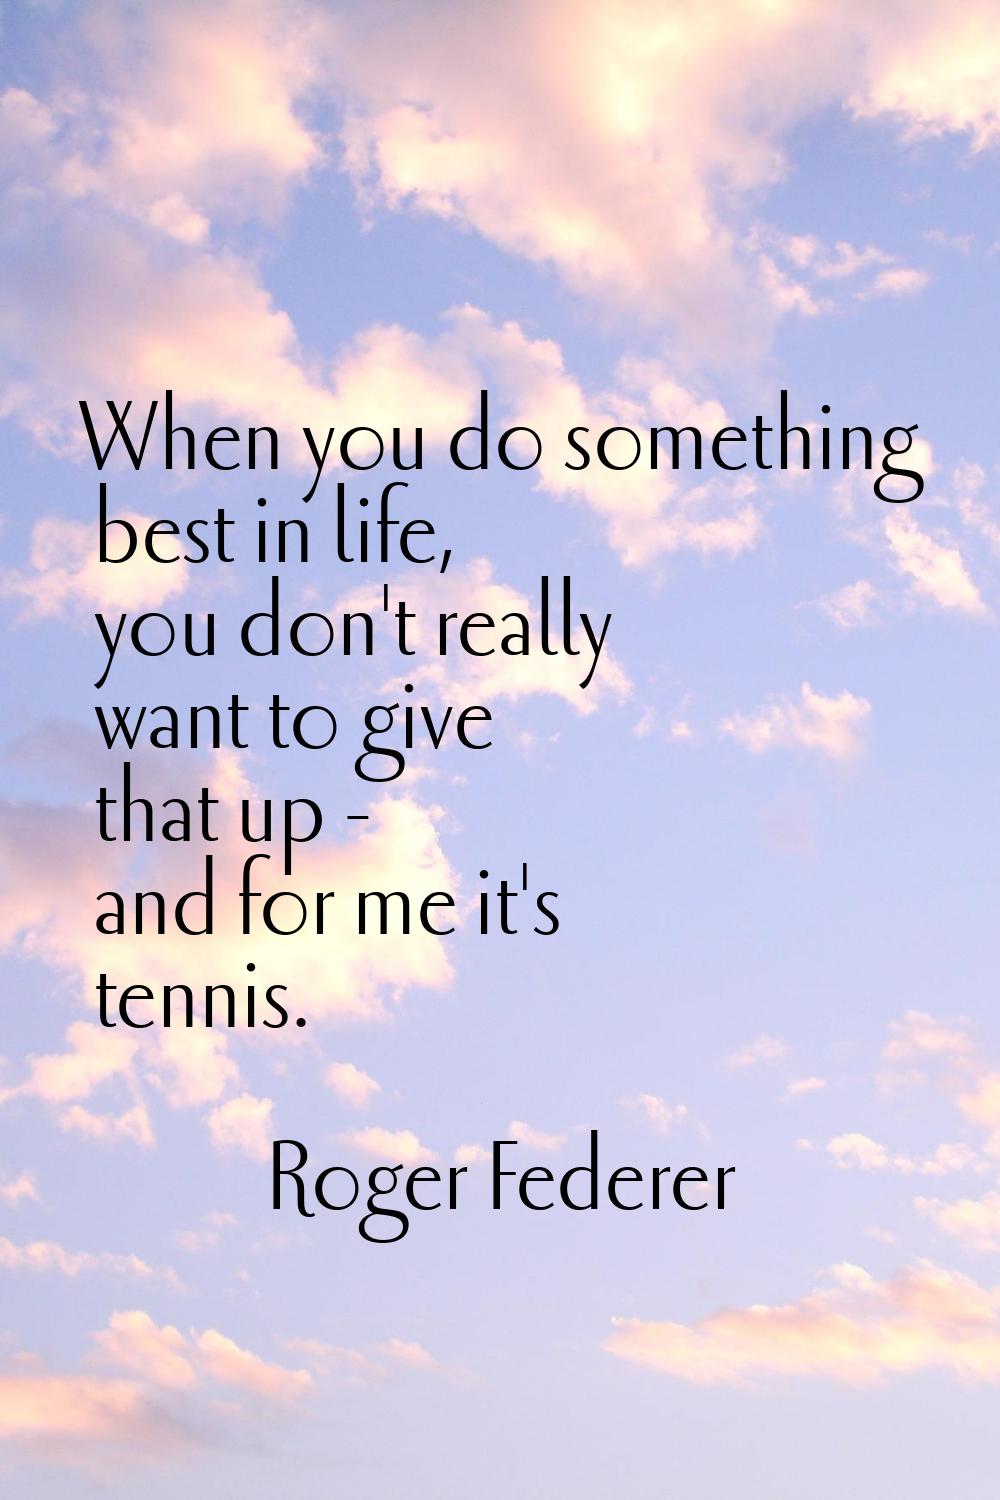 When you do something best in life, you don't really want to give that up - and for me it's tennis.